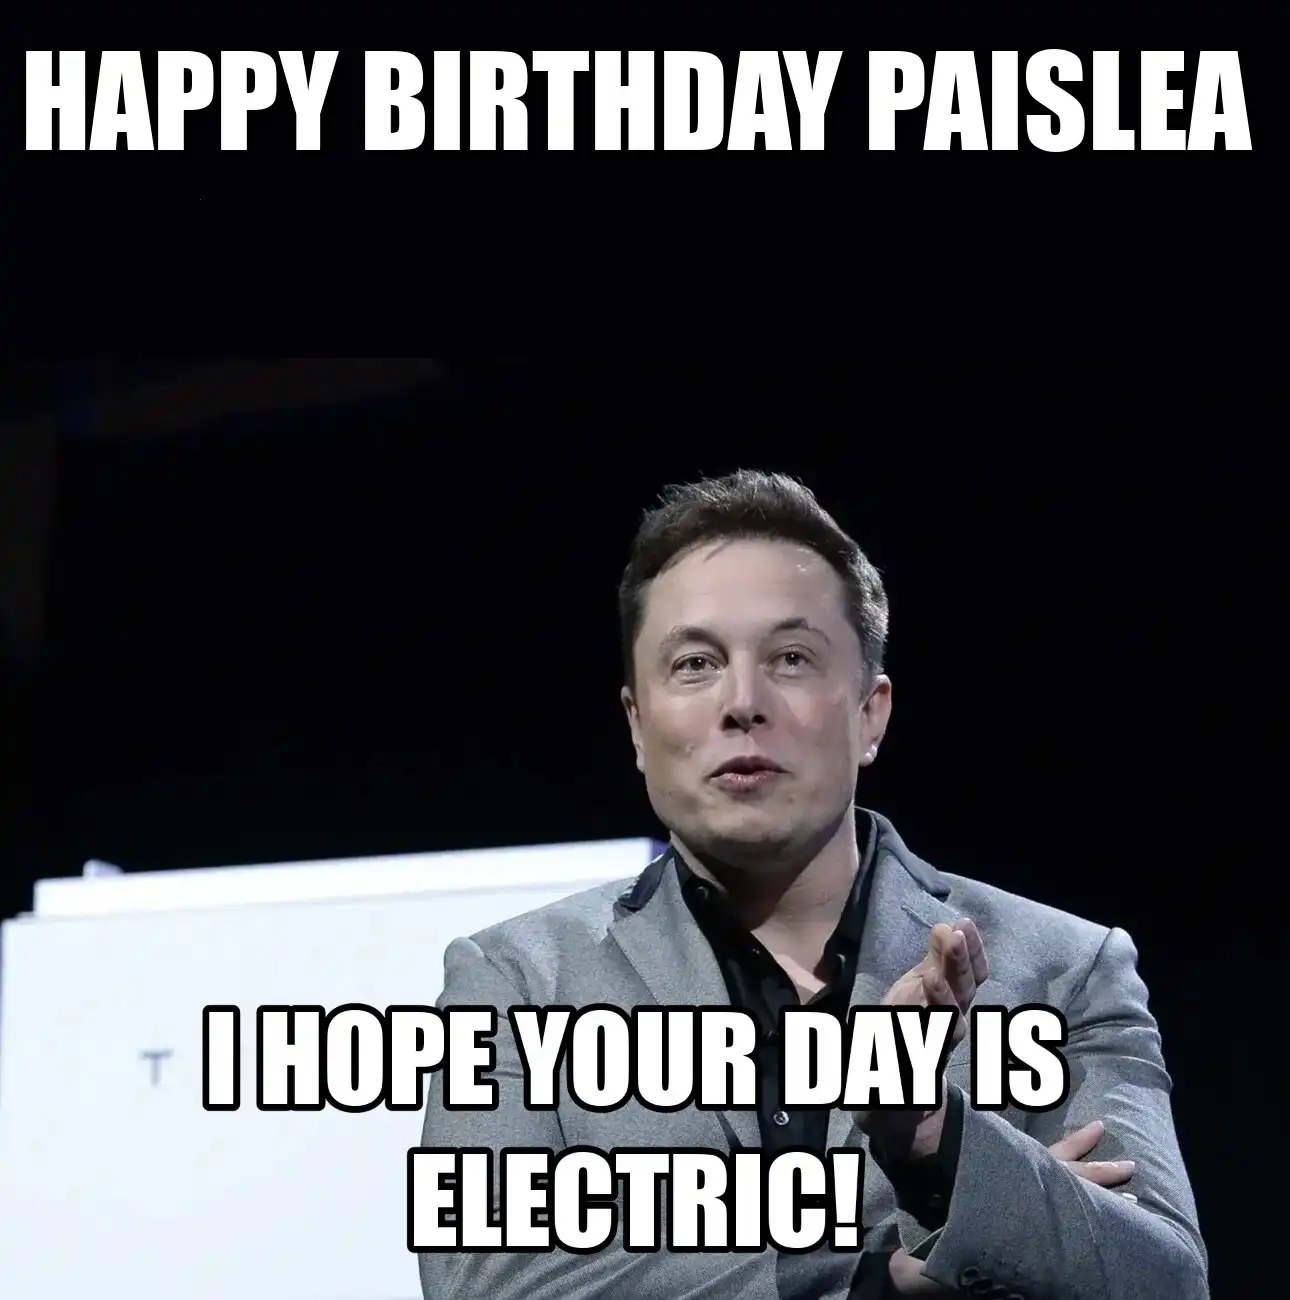 Happy Birthday Paislea I Hope Your Day Is Electric Meme